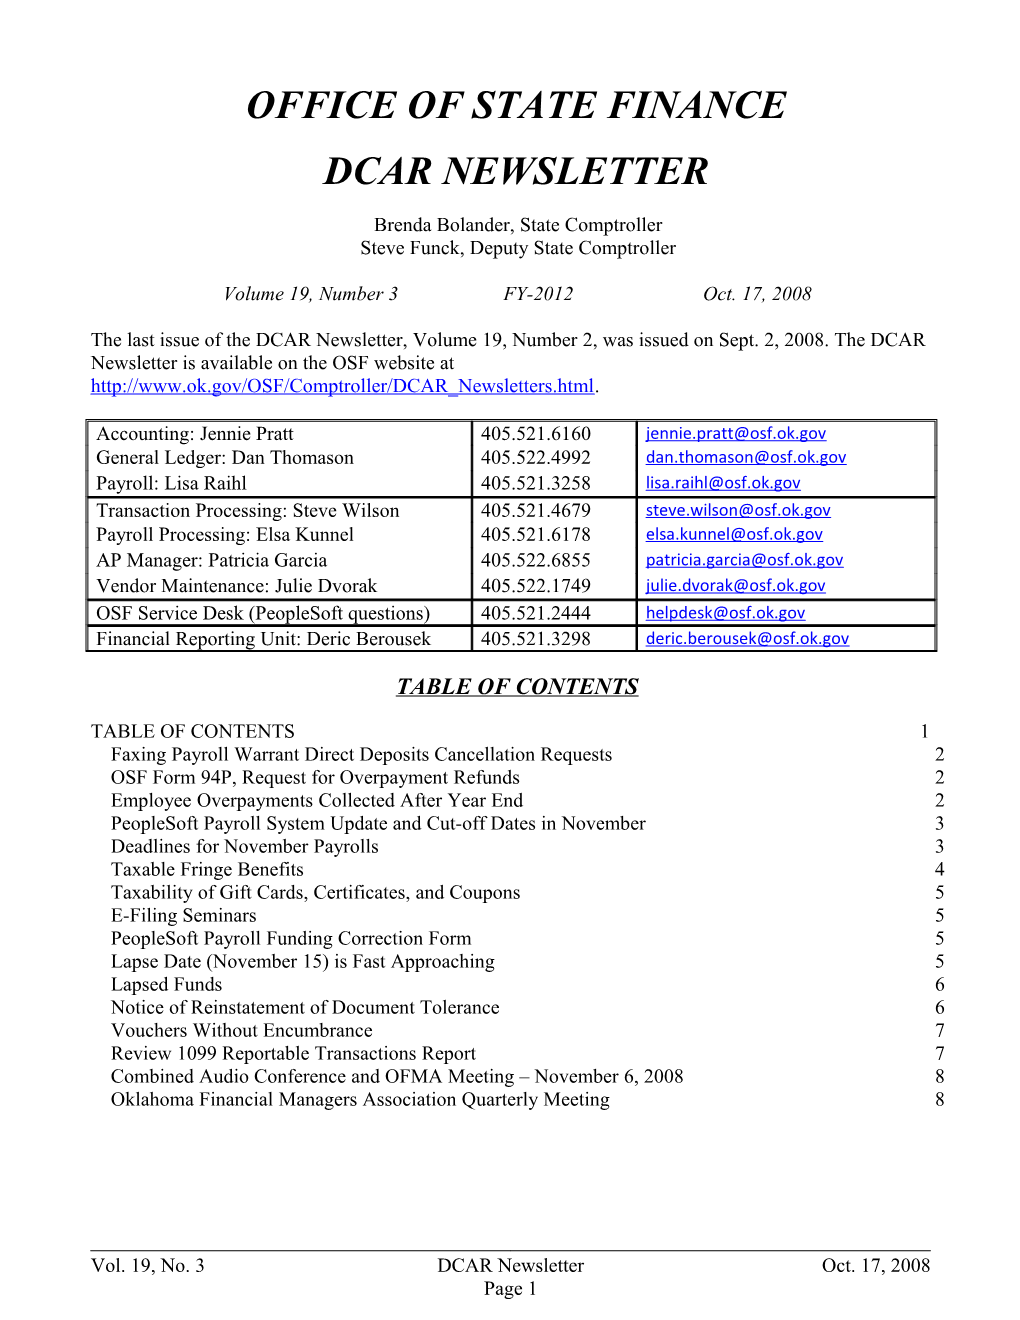 Office of State Finance DCAR Newsletter, Oct. 17, 2008